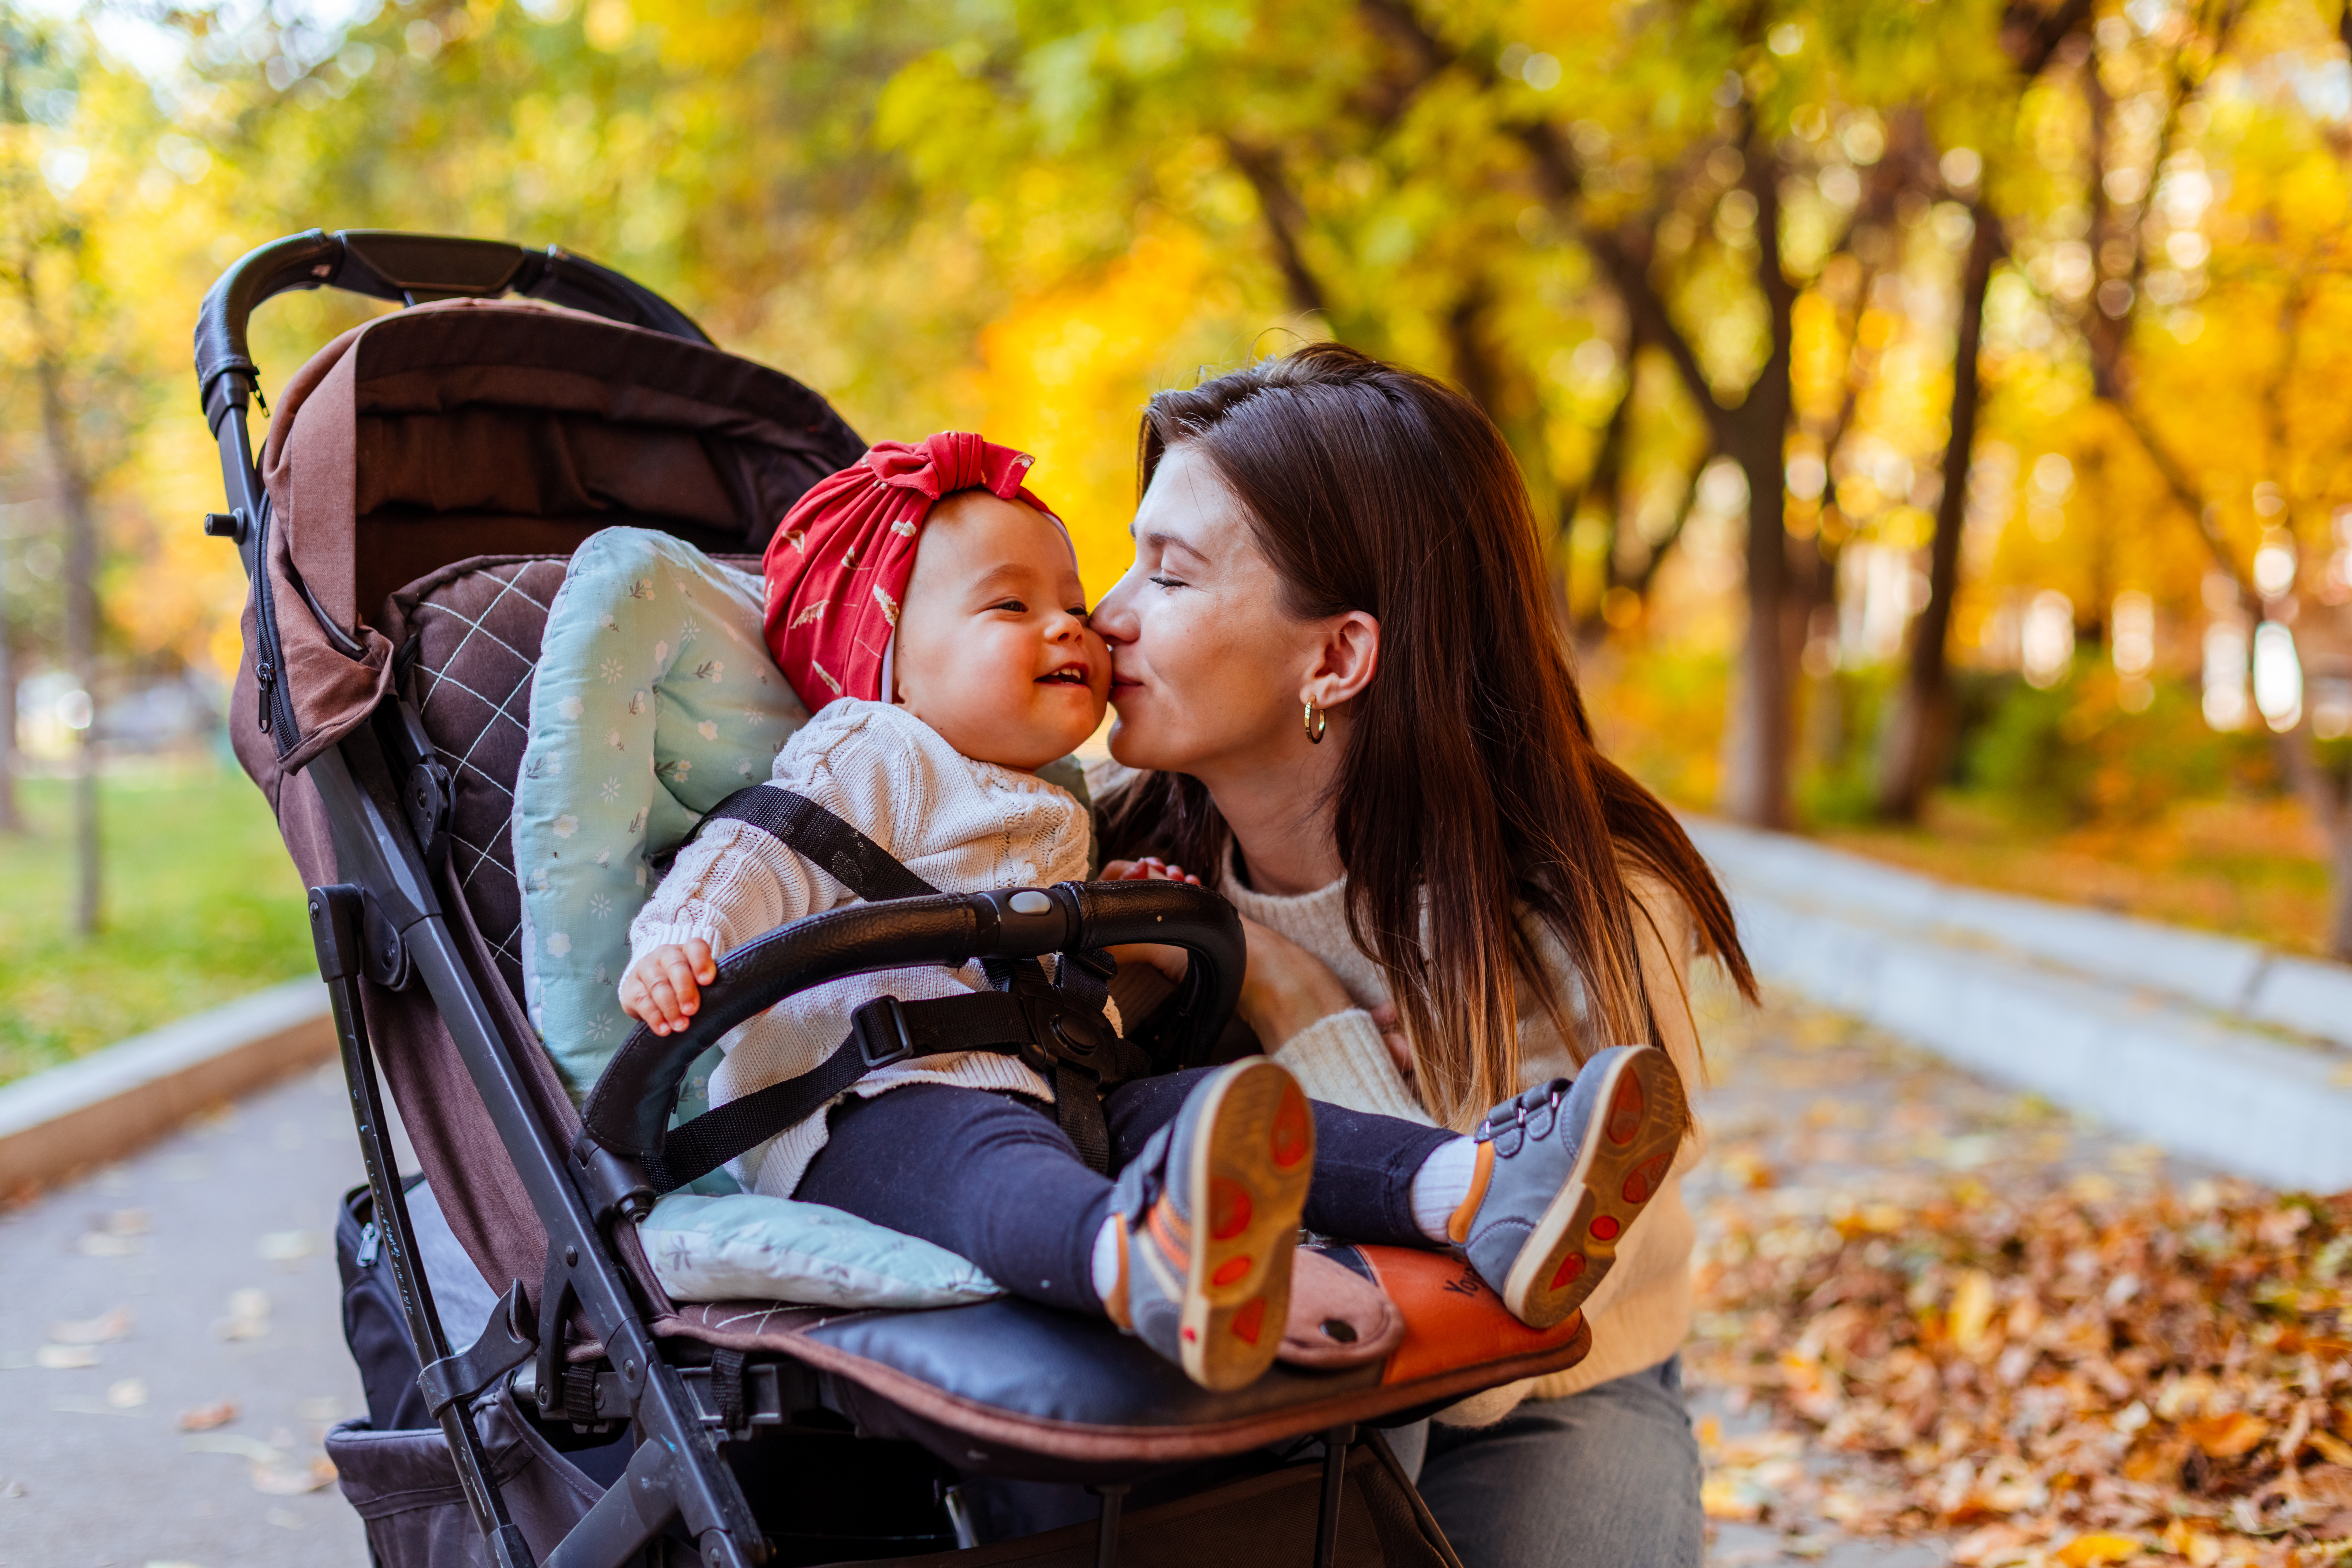 When Can Baby Sit in Stroller Without Car Seat